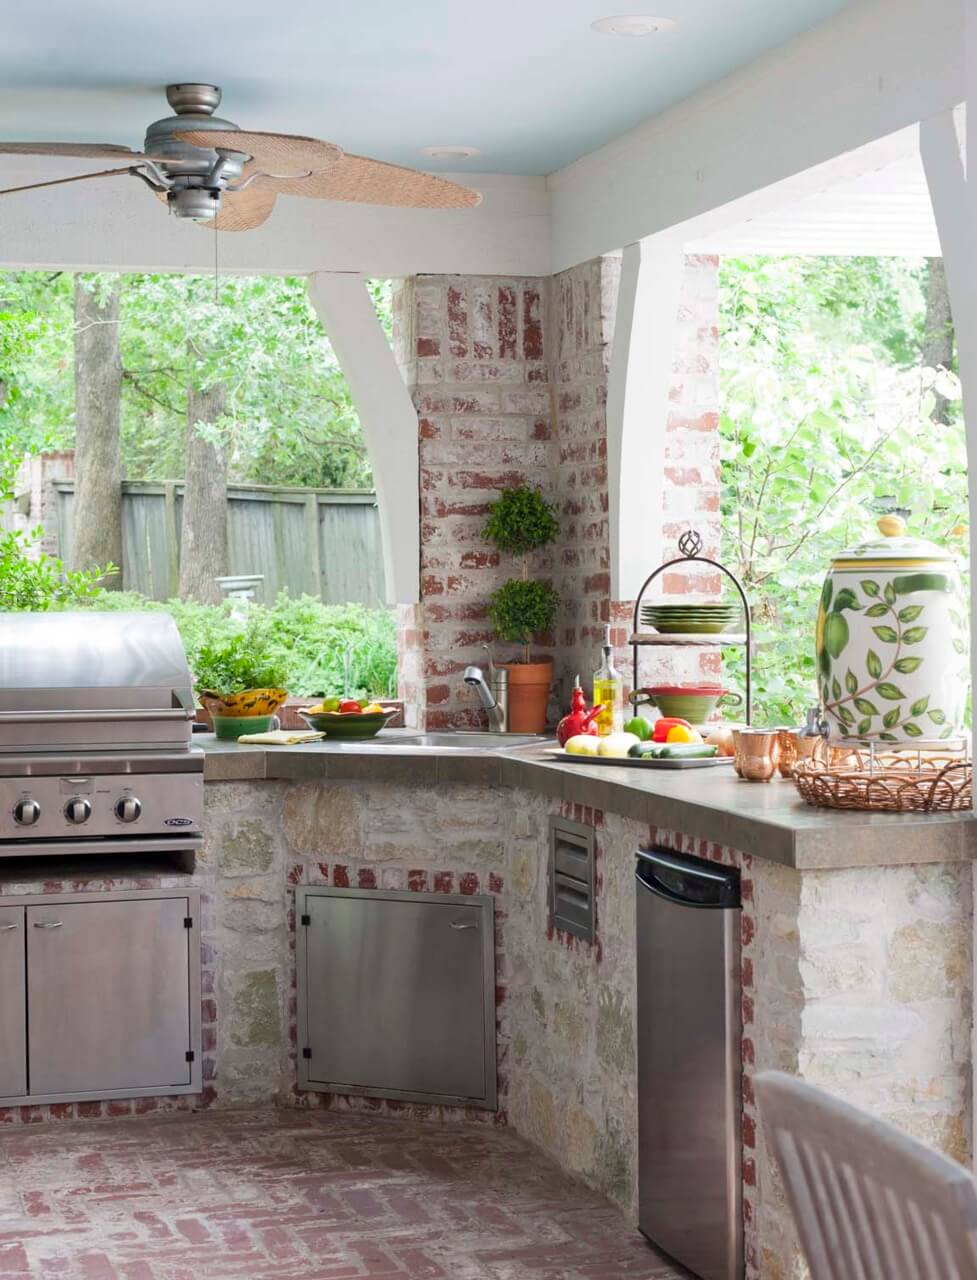 Rustic Outdoor Kitchen Design with Grill and Dishwasher